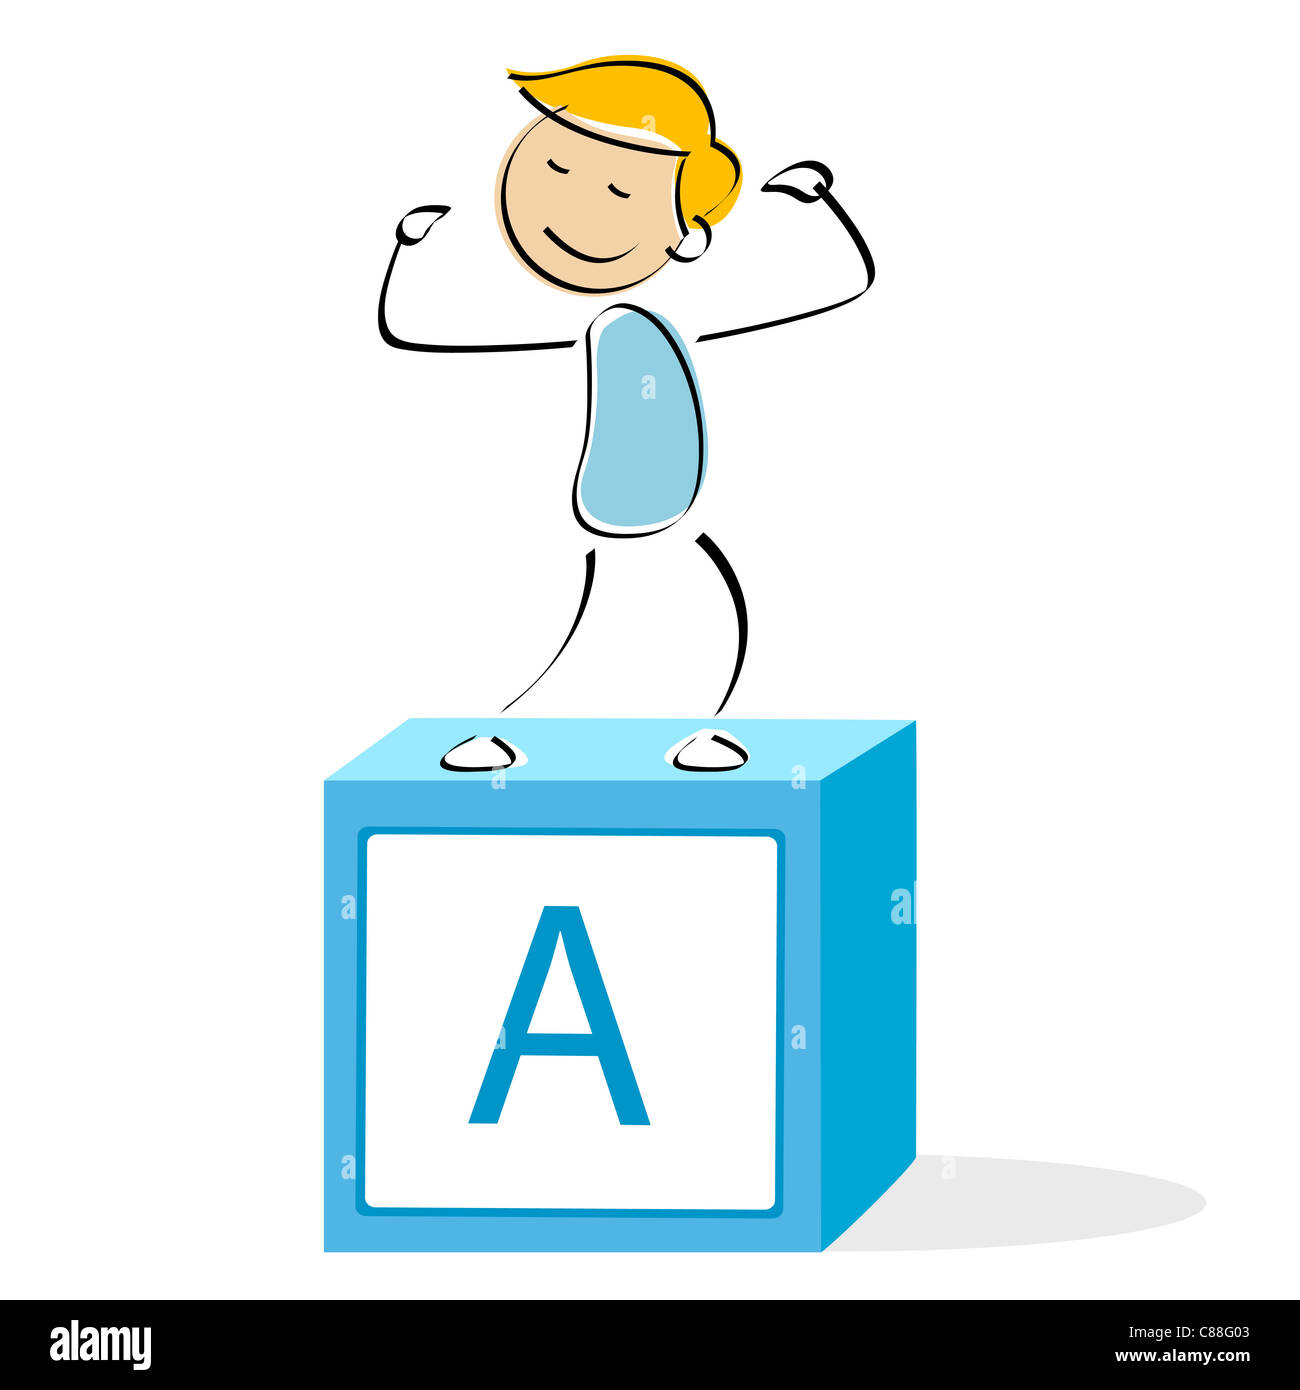 vector illustration of school boy standing on alphabet block against an isolated background Stock Photo